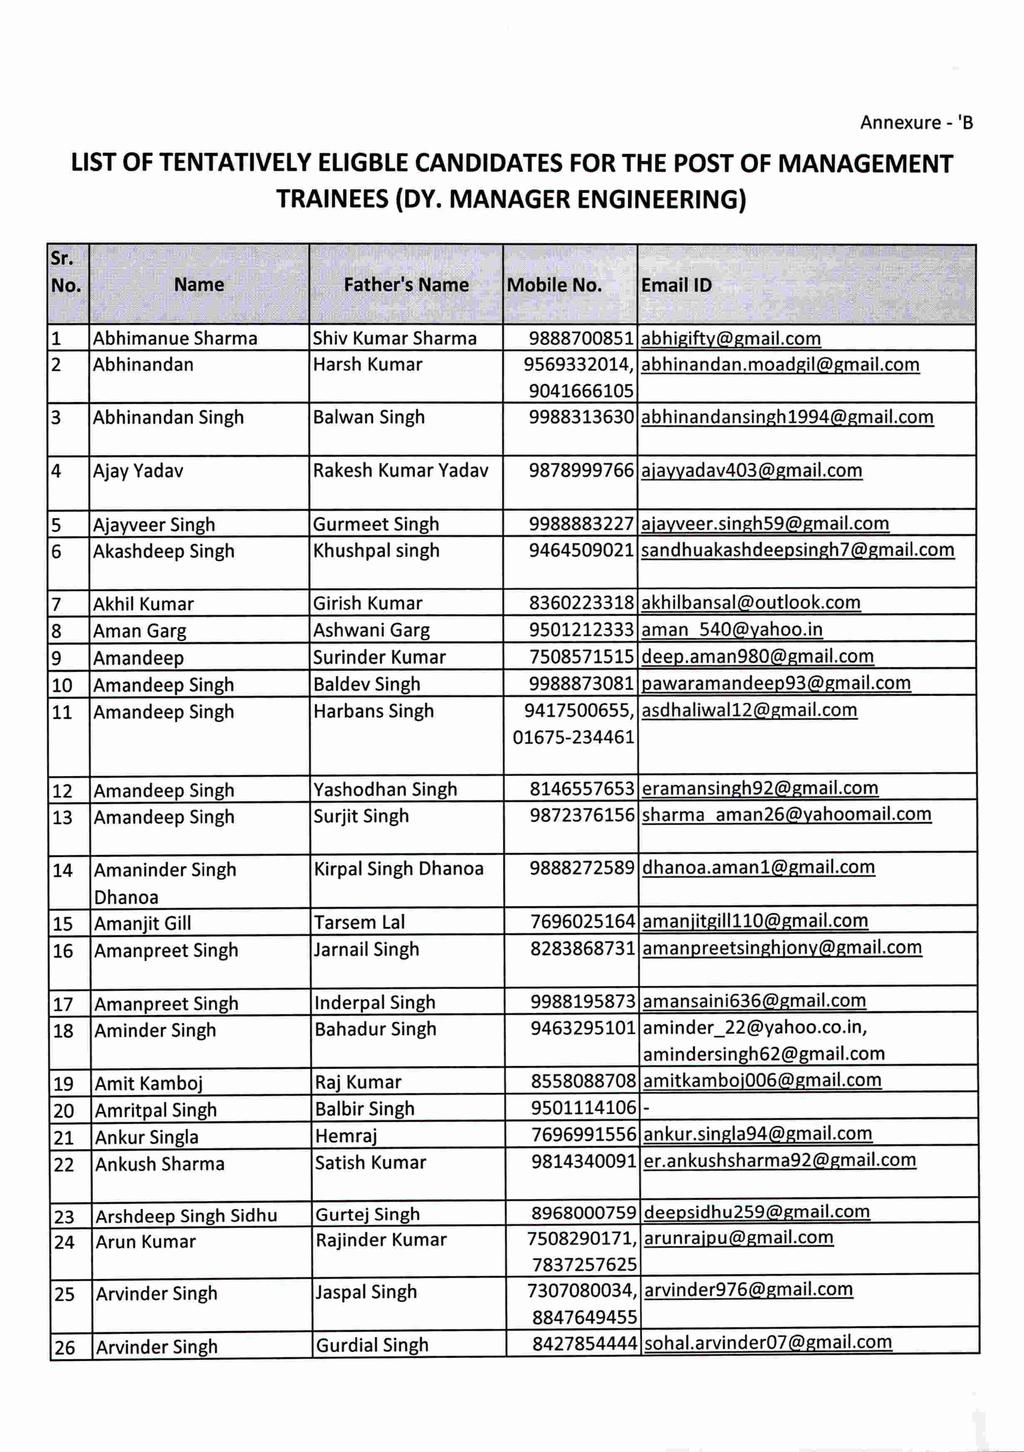 Annexure - 'B LIST OF TENTATIVELY ELlGBLE CANDIDATES FOR THE POST OF MANAGEMENT TRAINEES (DY. MANAGER ENGINEERING) 2 Abhinandan Harsh Kumar 9569332014, abhinandan.moadgil@gmail.